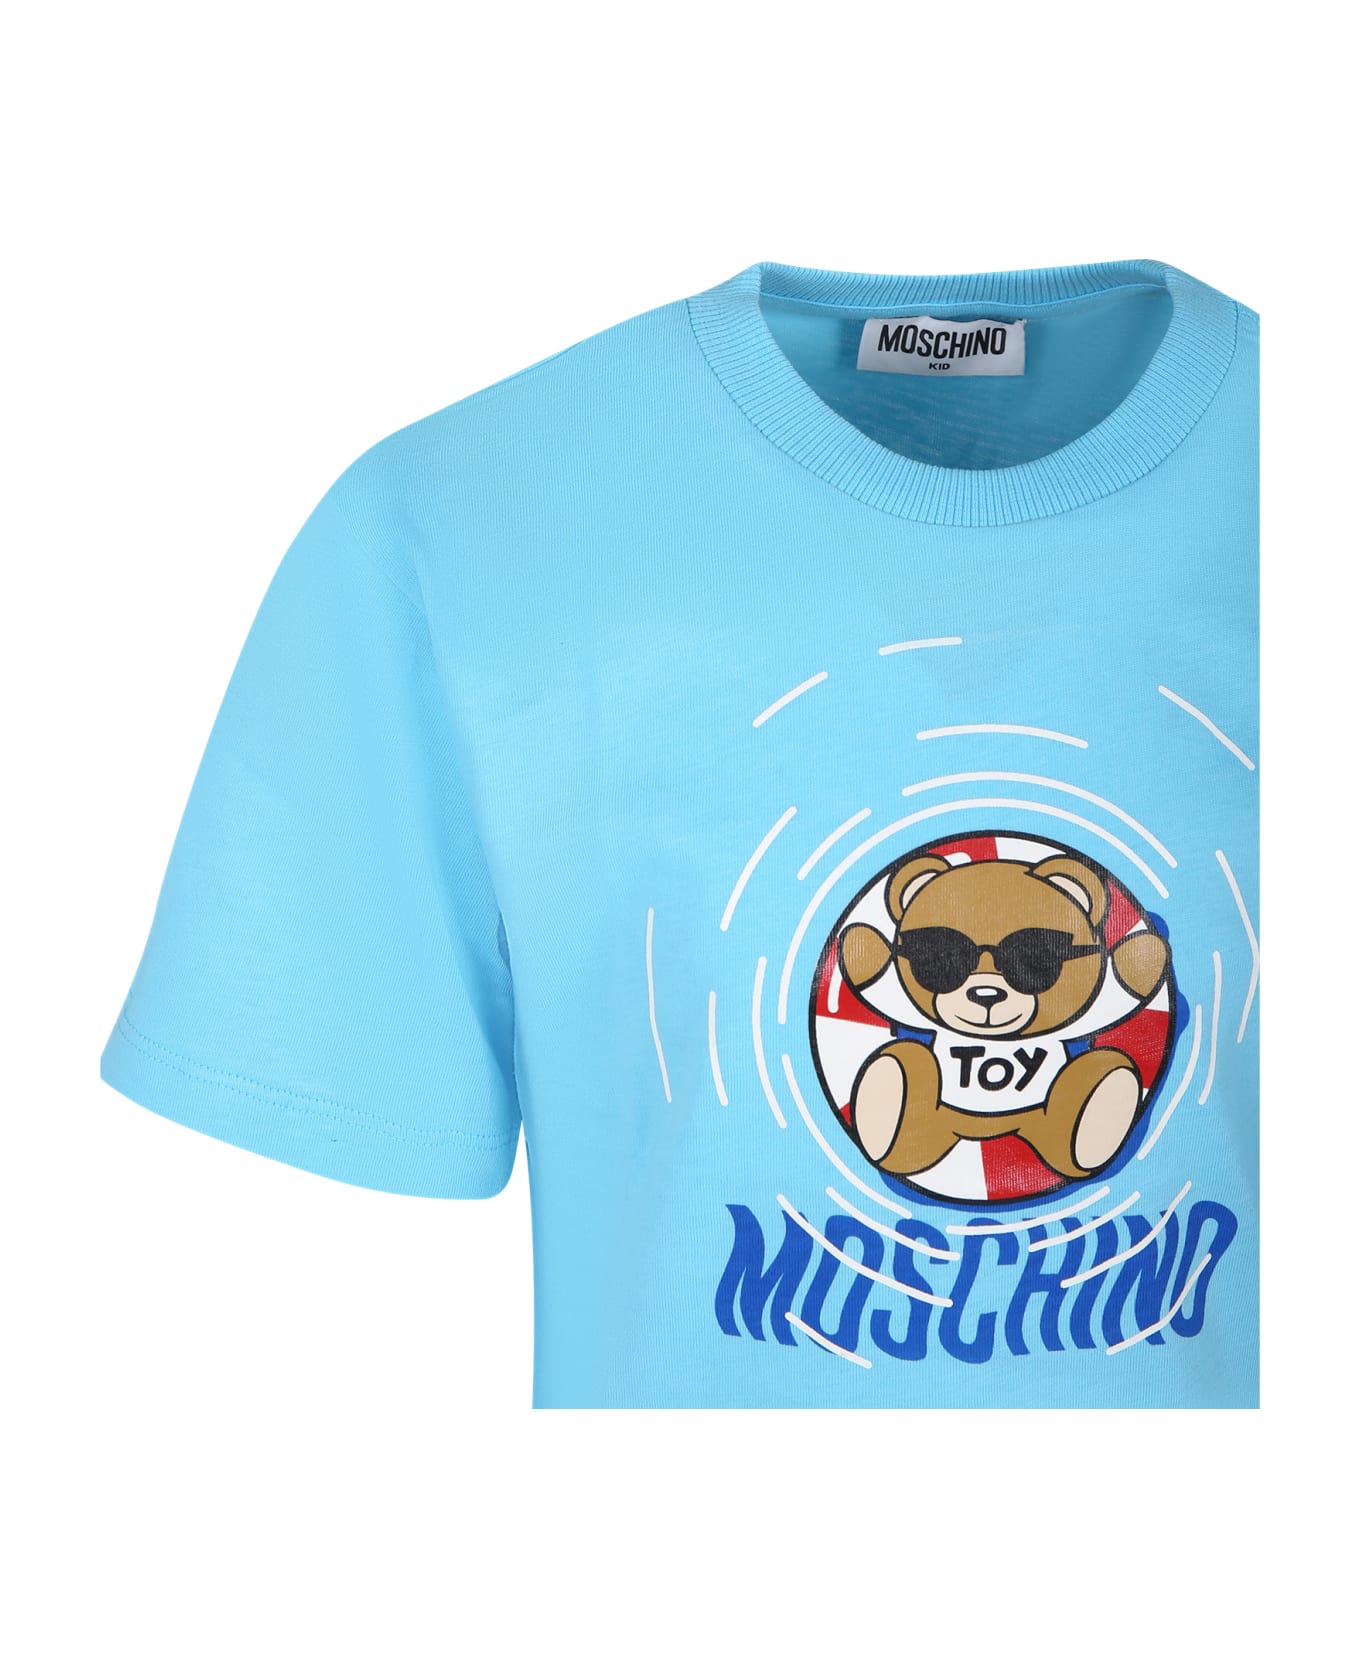 Moschino Light Blue T-shirt For Boy With Multicolored Print And Teddy Bear - Light Blue